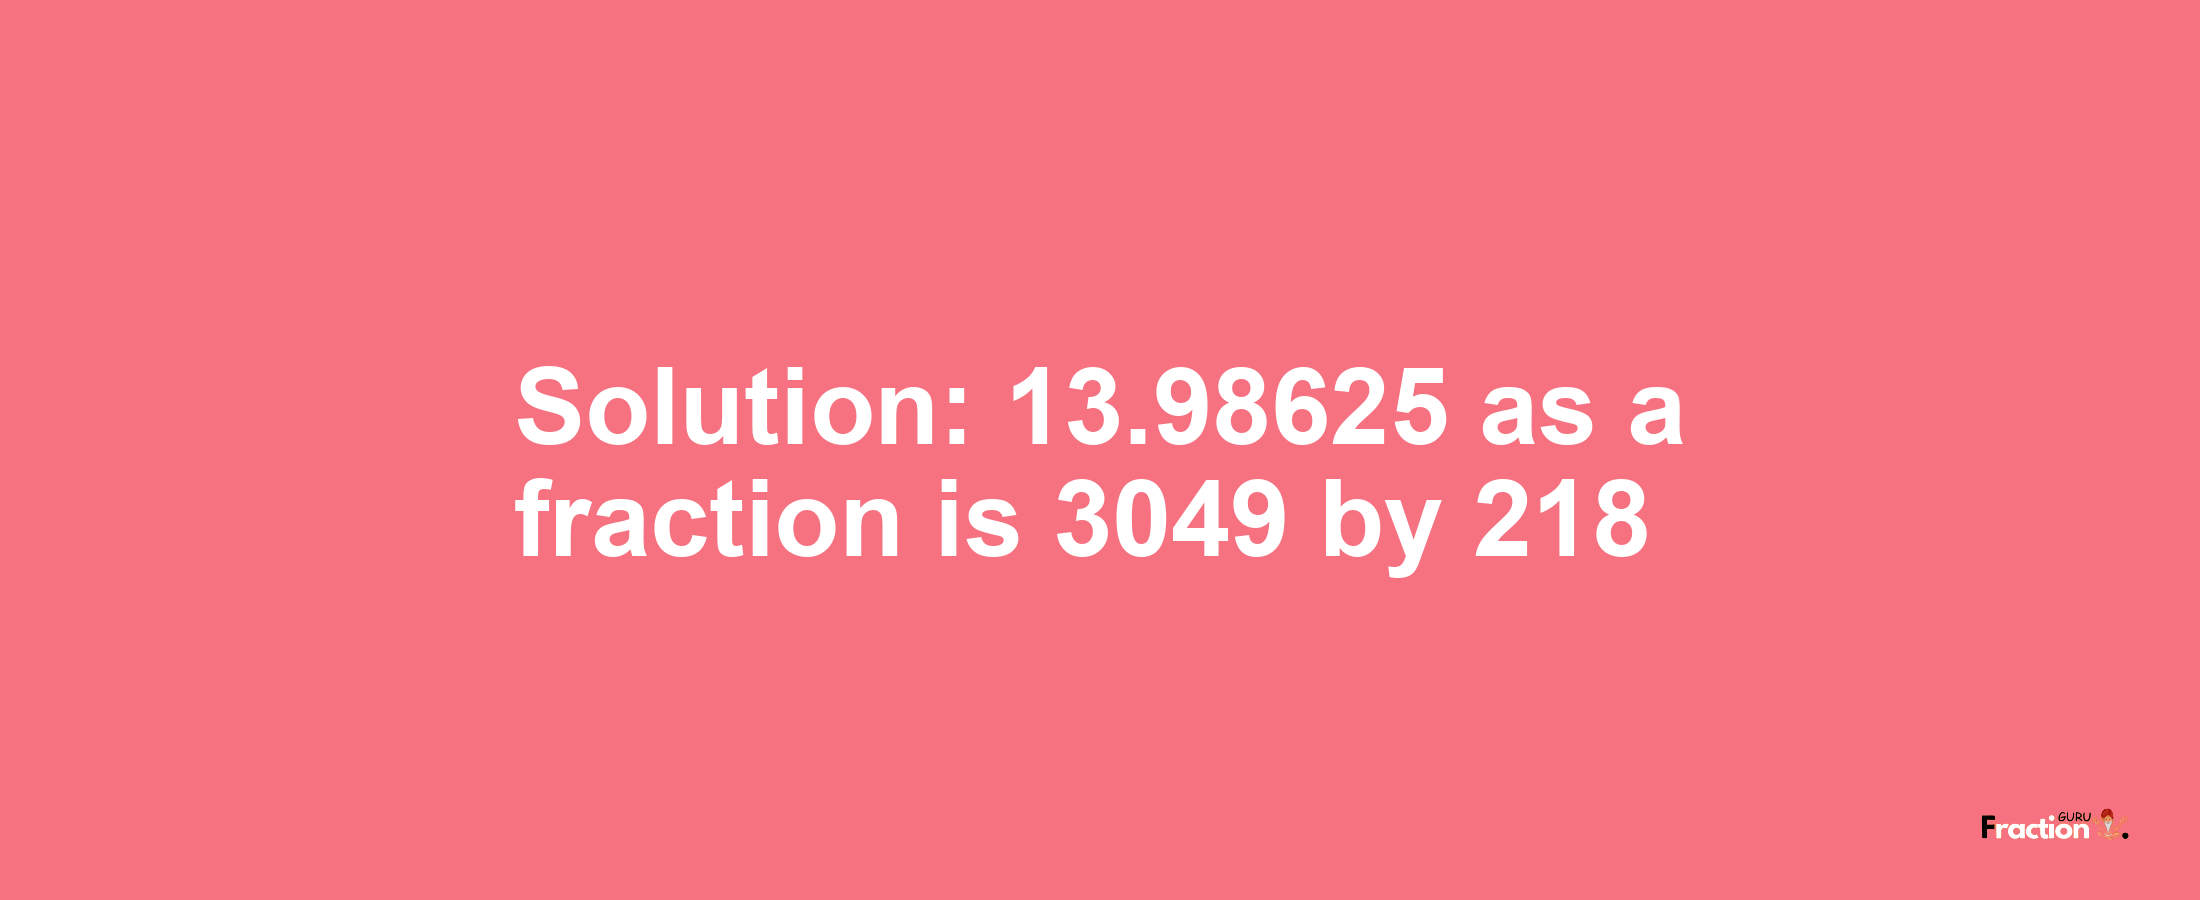 Solution:13.98625 as a fraction is 3049/218